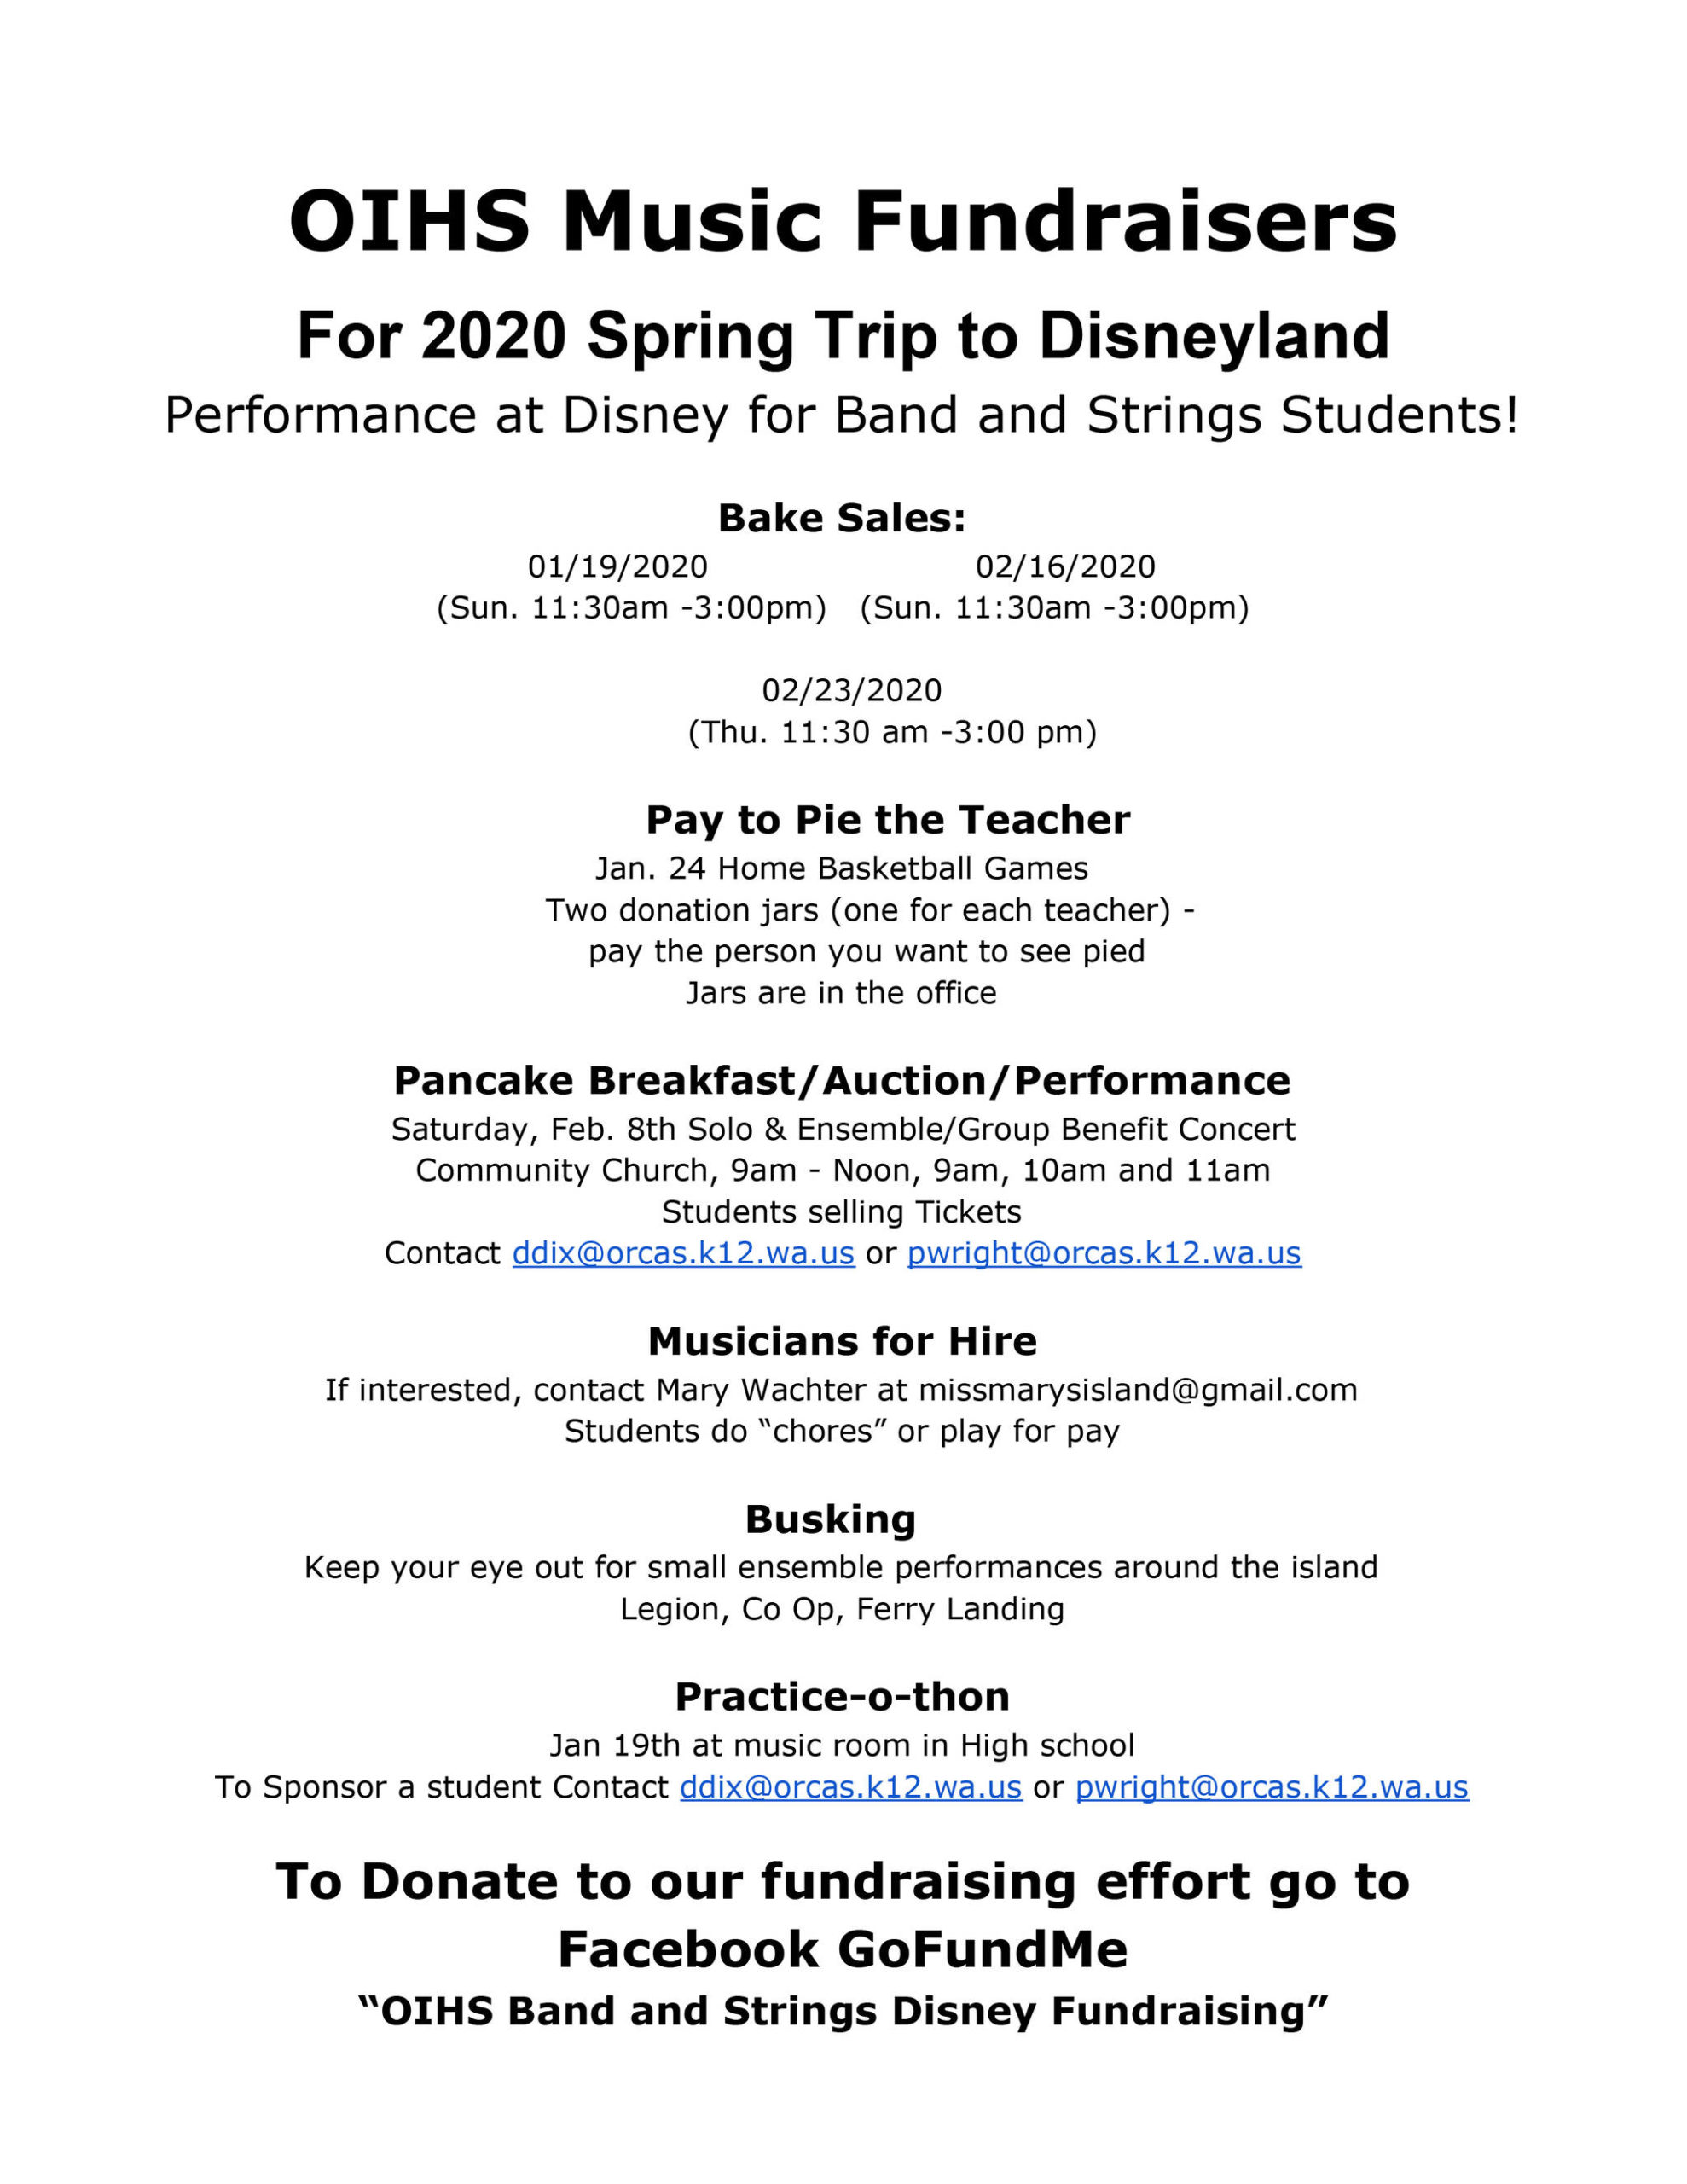 Music students fundraising for trip